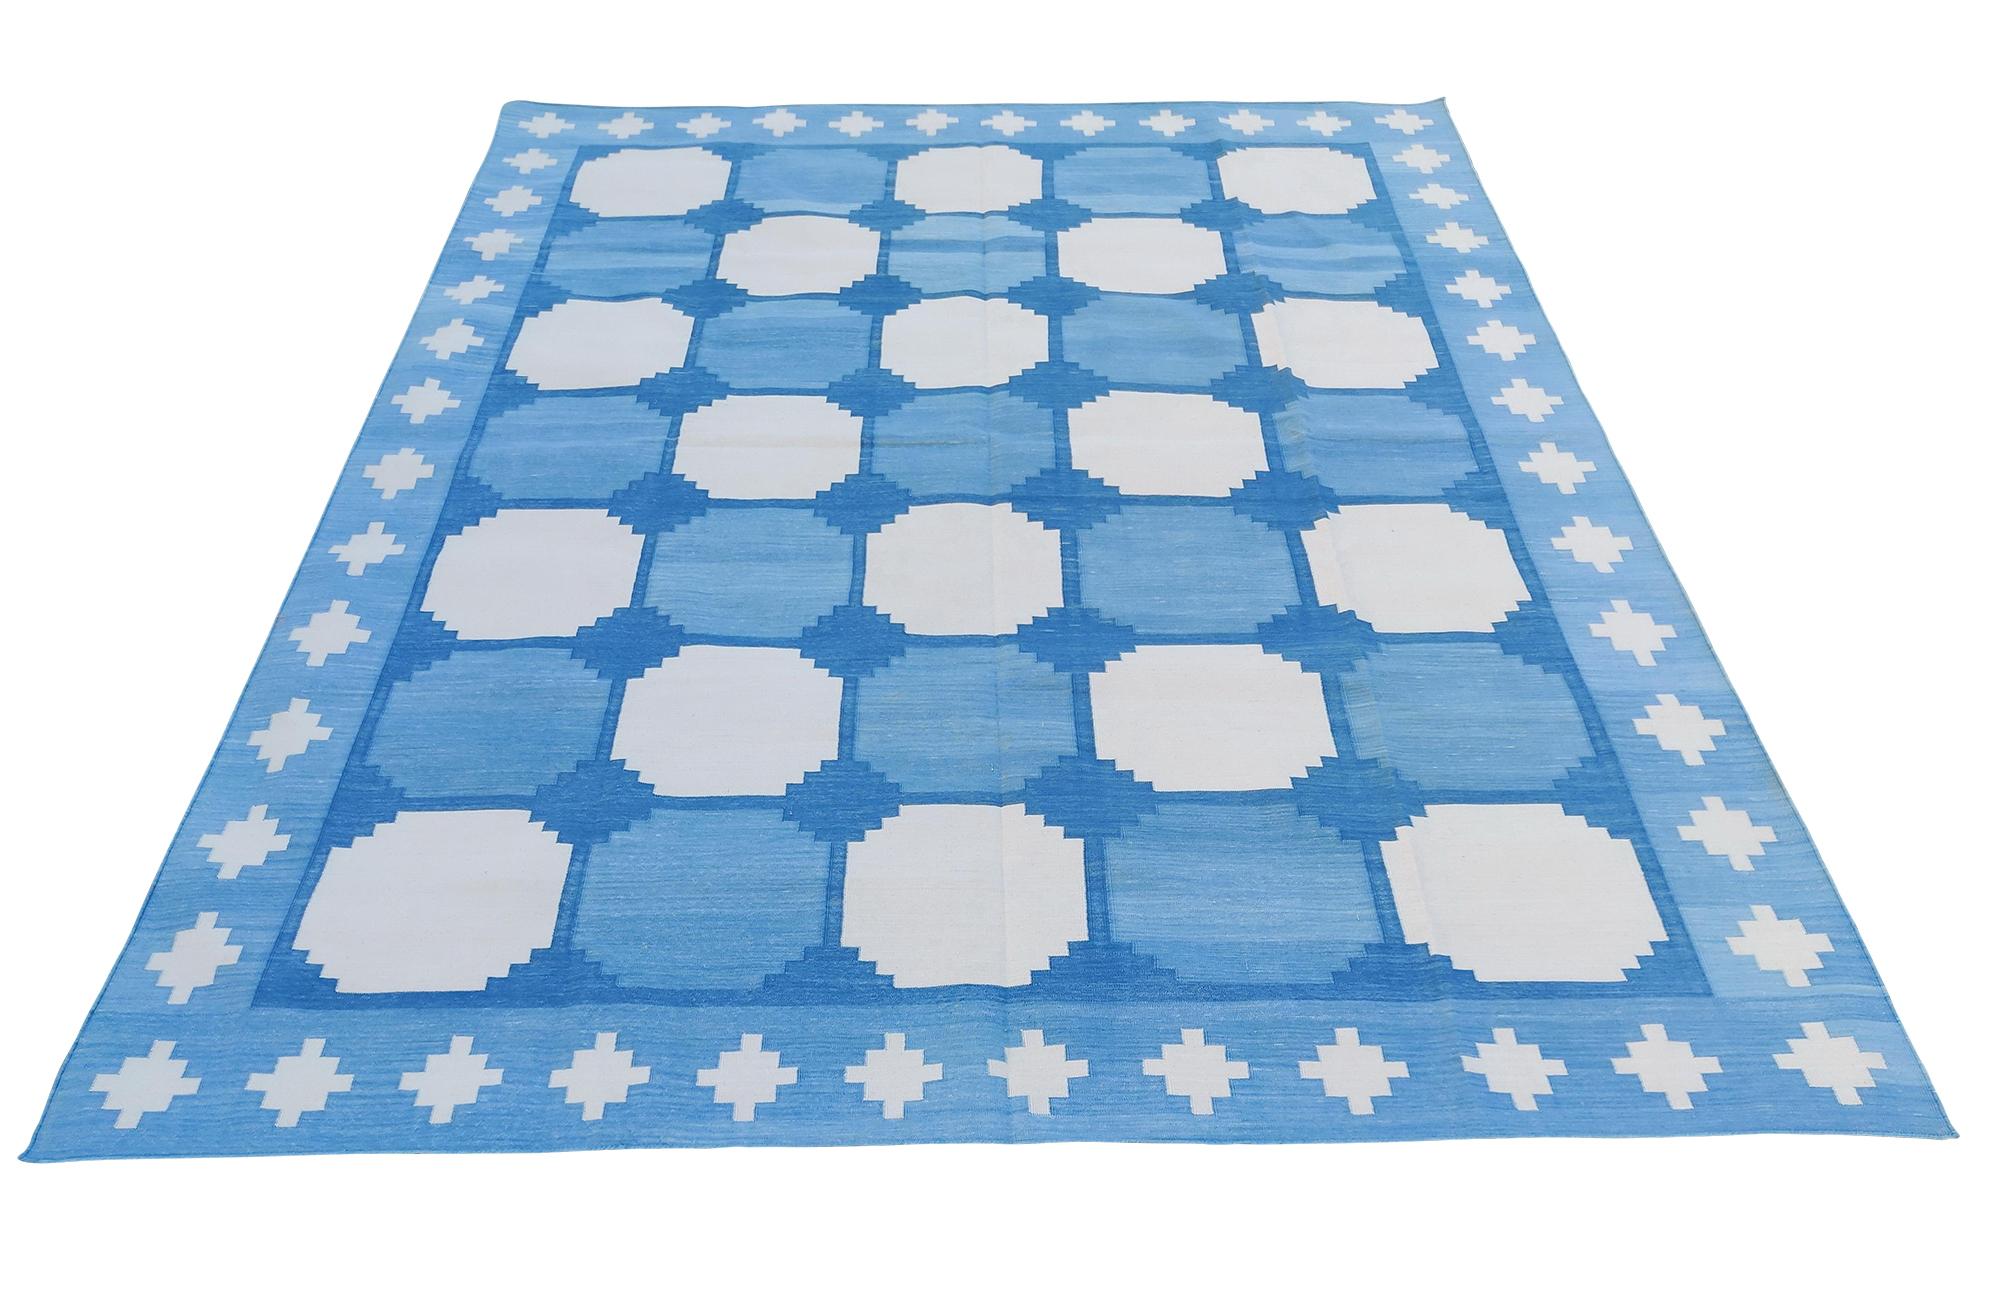 Cotton Natural Vegetable Dyed, Sky Blue And Cream Tile Patterned Rug-8'x10'
These special flat-weave dhurries are hand-woven with 15 ply 100% cotton yarn. Due to the special manufacturing techniques used to create our rugs, the size and color of